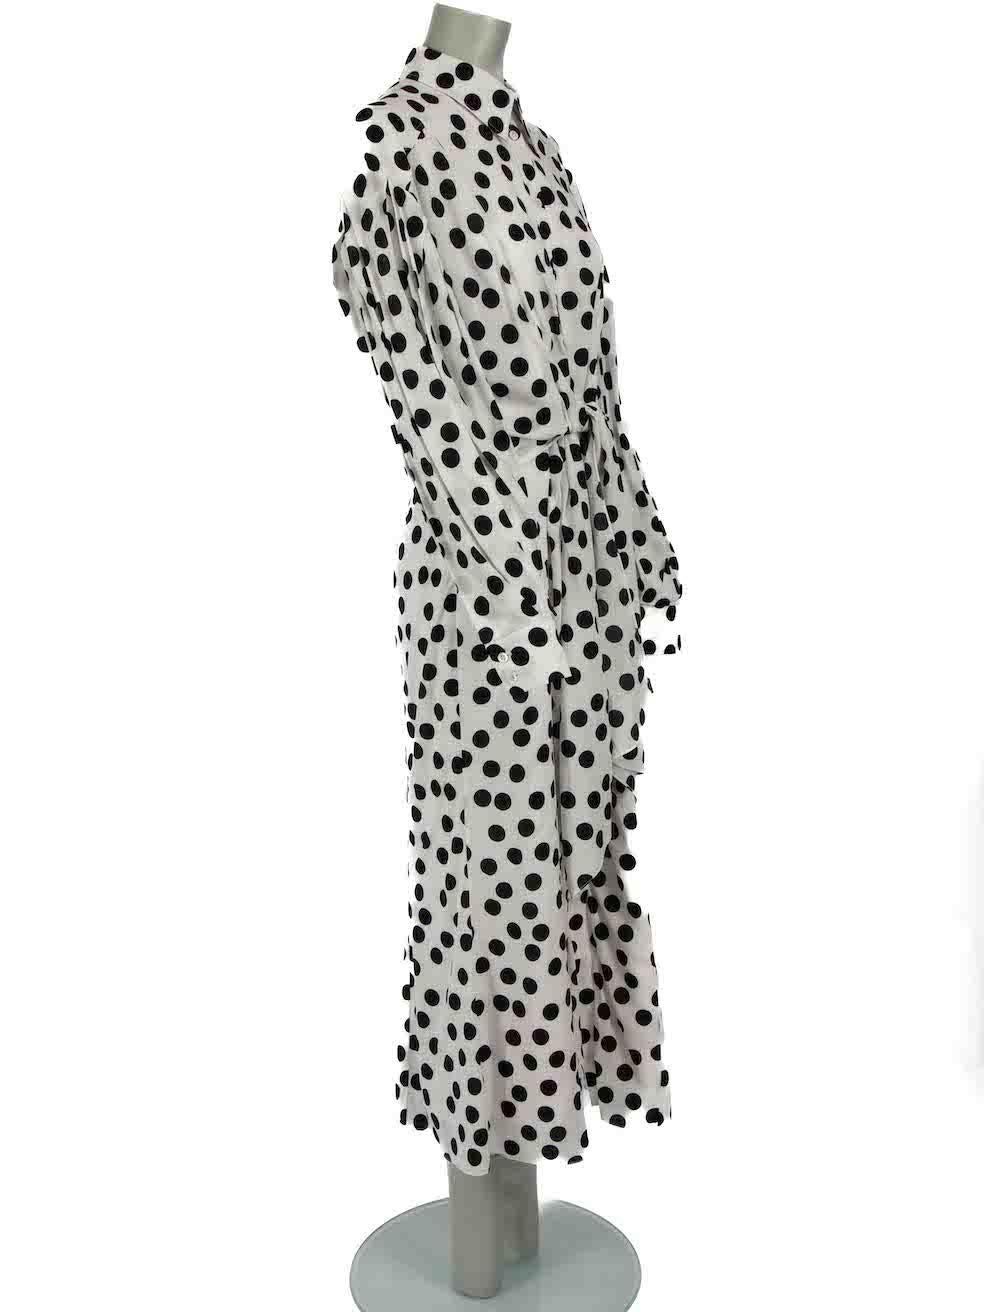 CONDITION is Very good. Hardly any visible wear to dress is evident on this used Carolina Herrera designer resale item.
 
Details
White
Viscose
Shirt dress
Polkadot pattern
Midi
Long sleeves
Button up fastening
Round neck
Waist tie belt
  
Made in